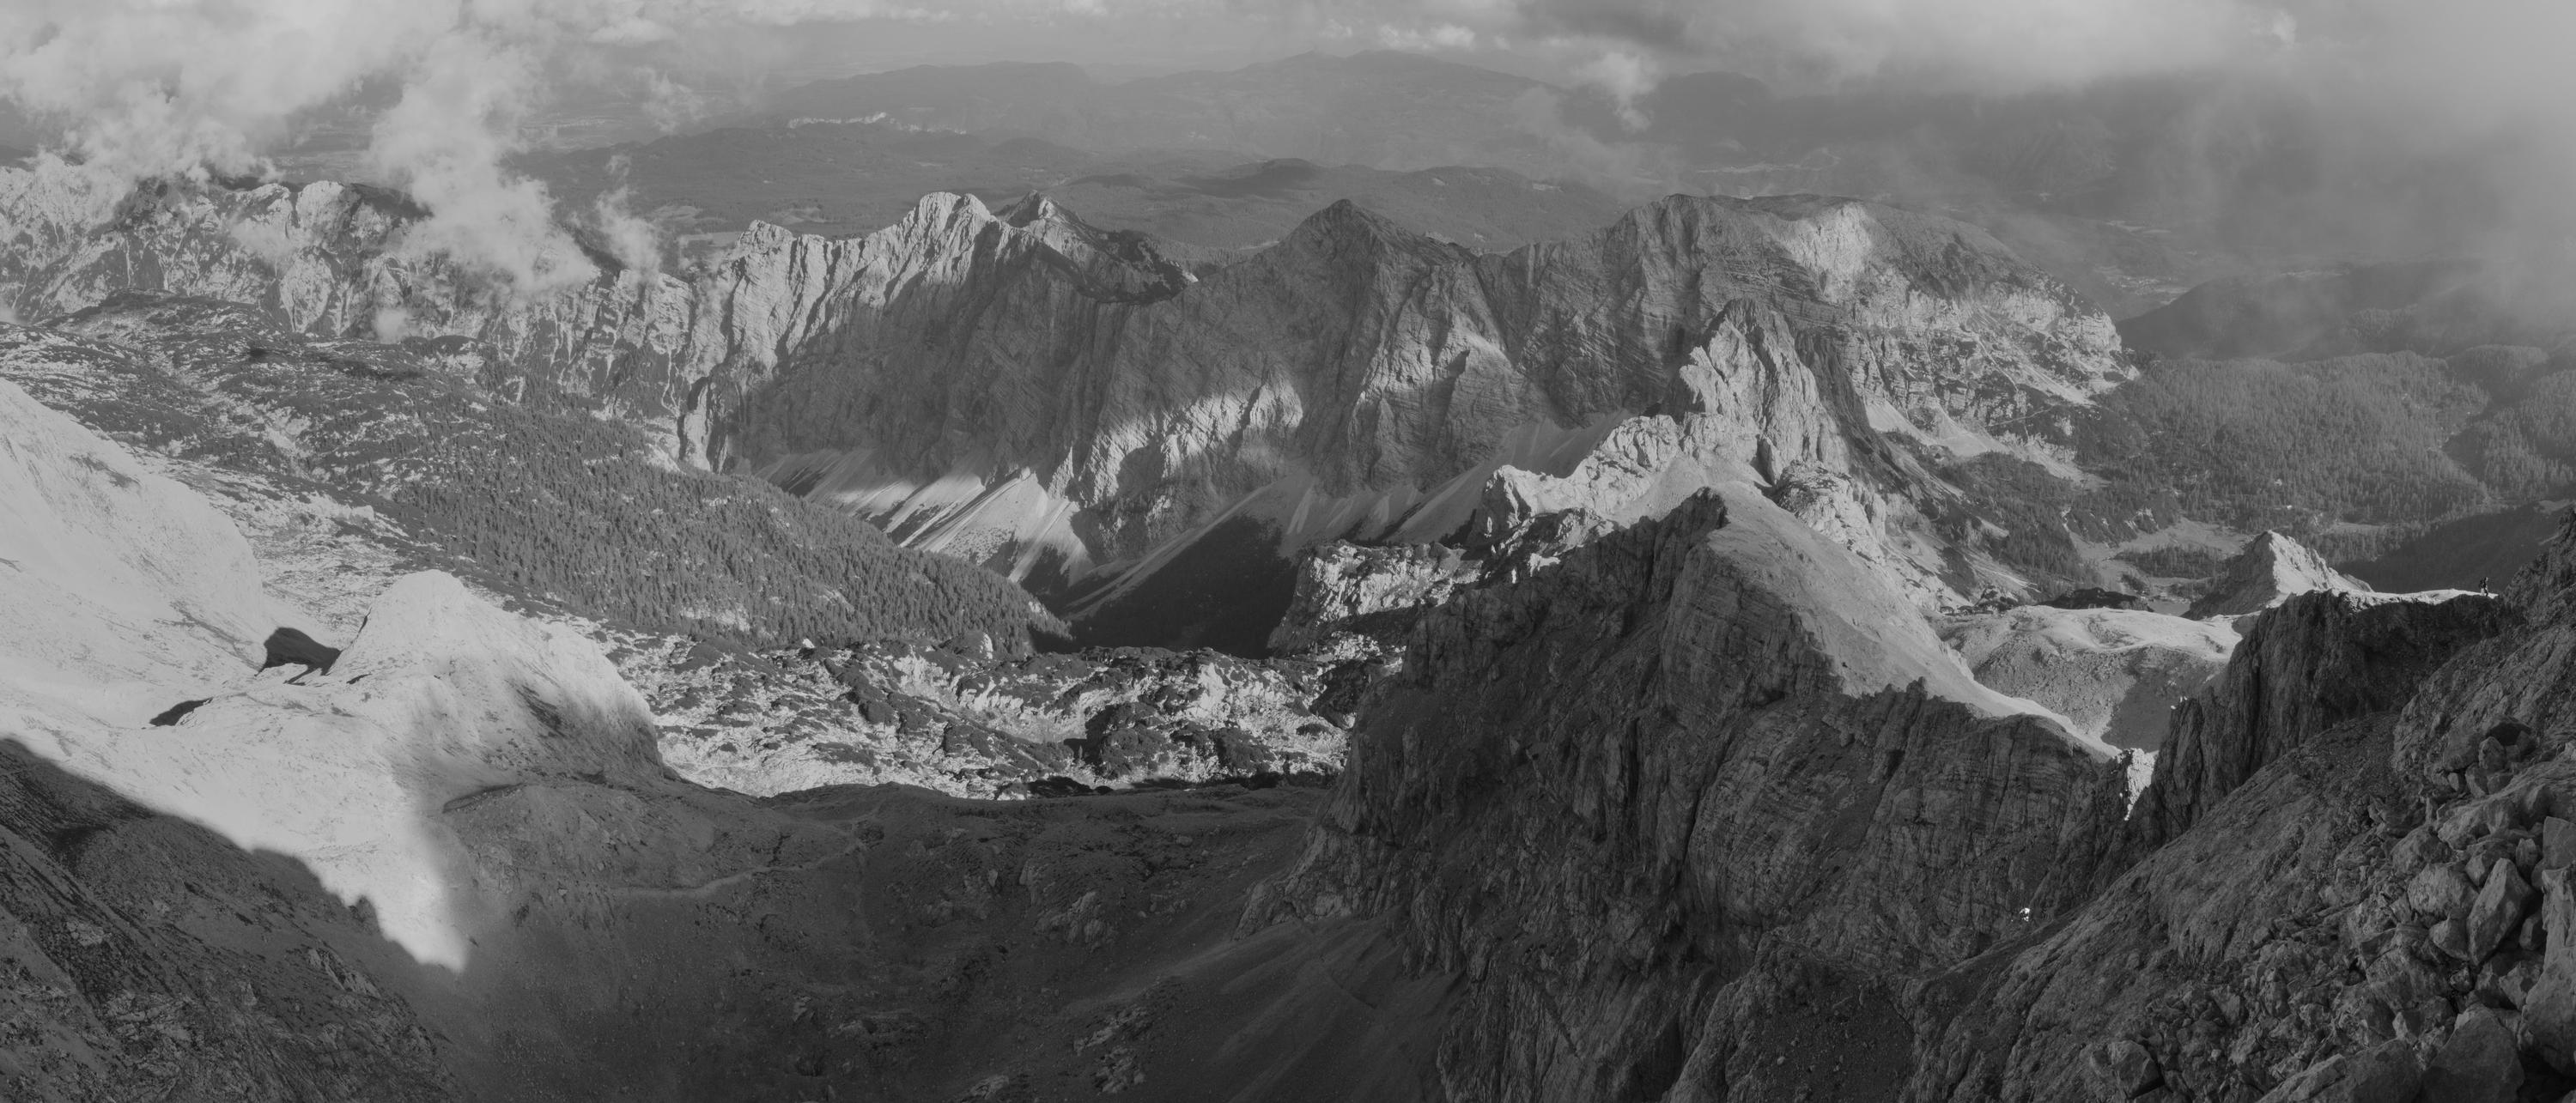 A panorama from the eastern ridge of Mount Triglav as the range falls into shade in the early evening. Slovenia